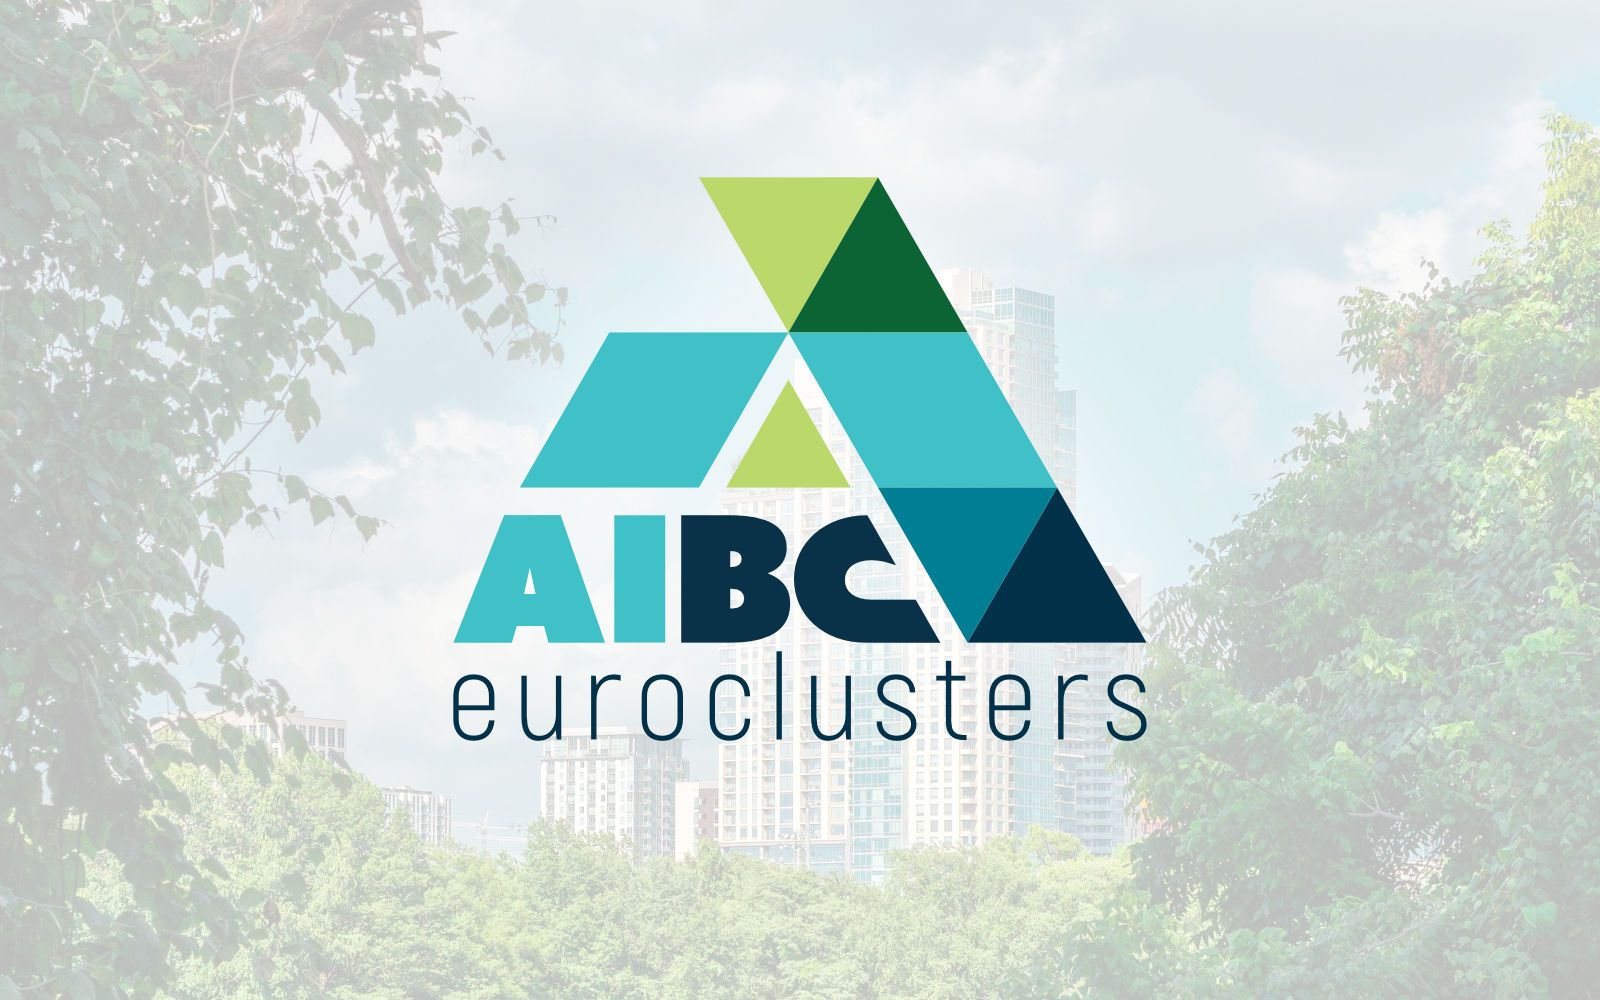 Logo of the AIBC Euroclusters.